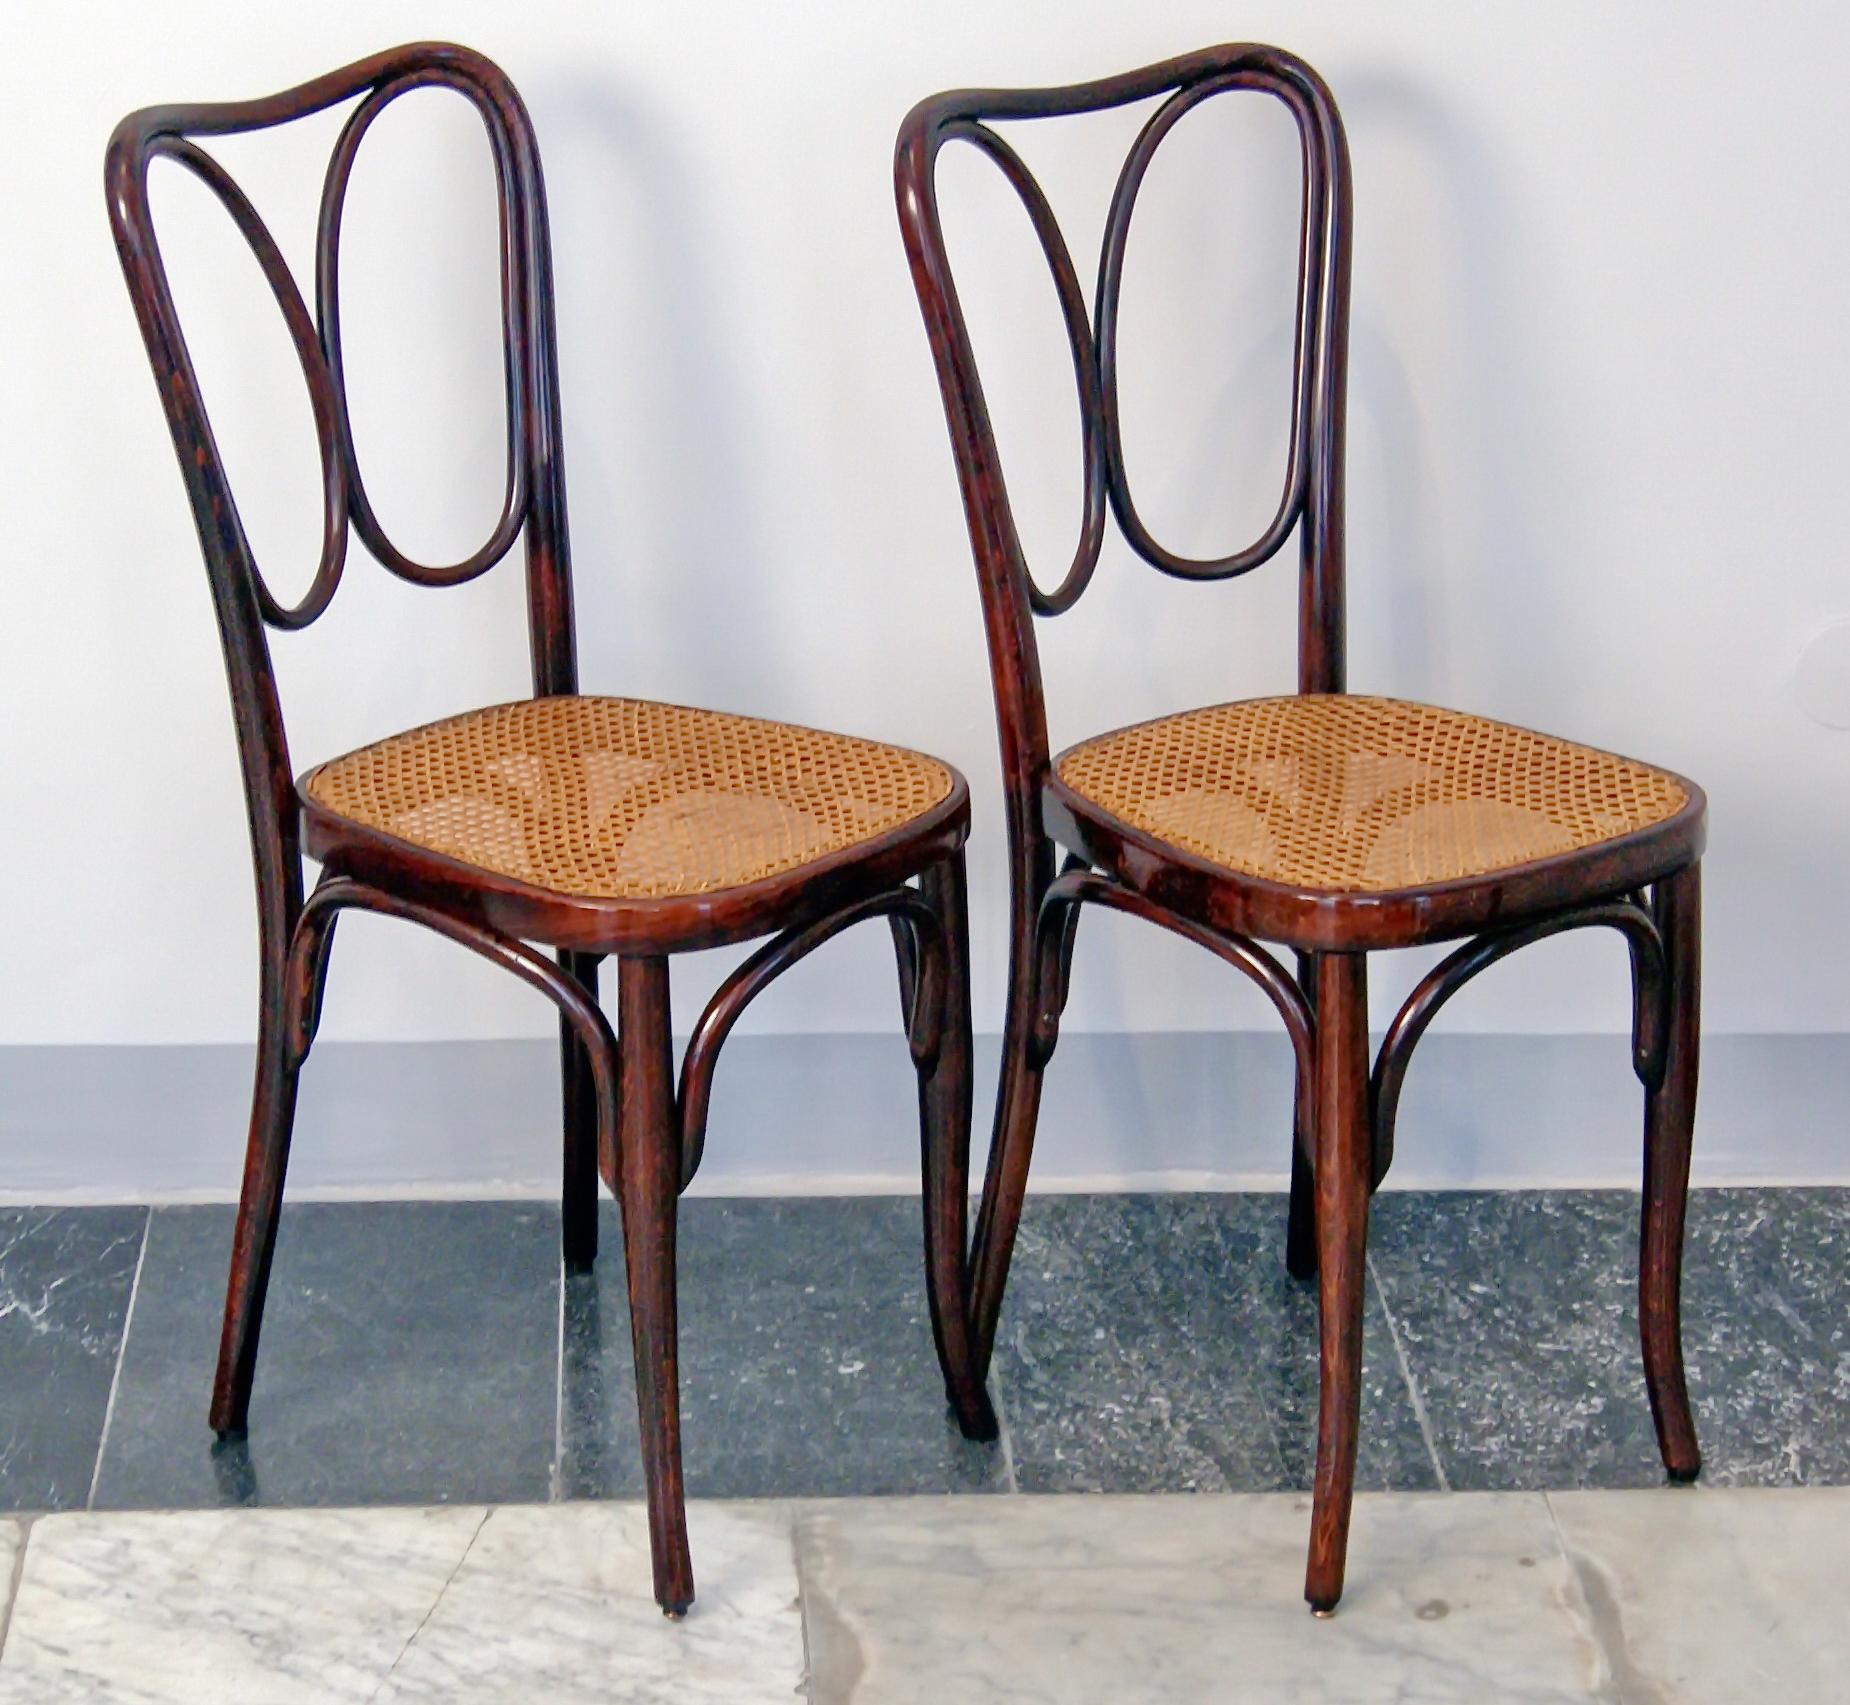 Jacob & Josef Kohn bentwood pair of chairs (model 243)
Made in Vienna / Austria, Art Nouveau period.
Beechwood 
Dark mahogany stained 
Seat is covered with wickerwork (original)
Made circa 1905

Beechwood, dark mahogany stained, refurbished